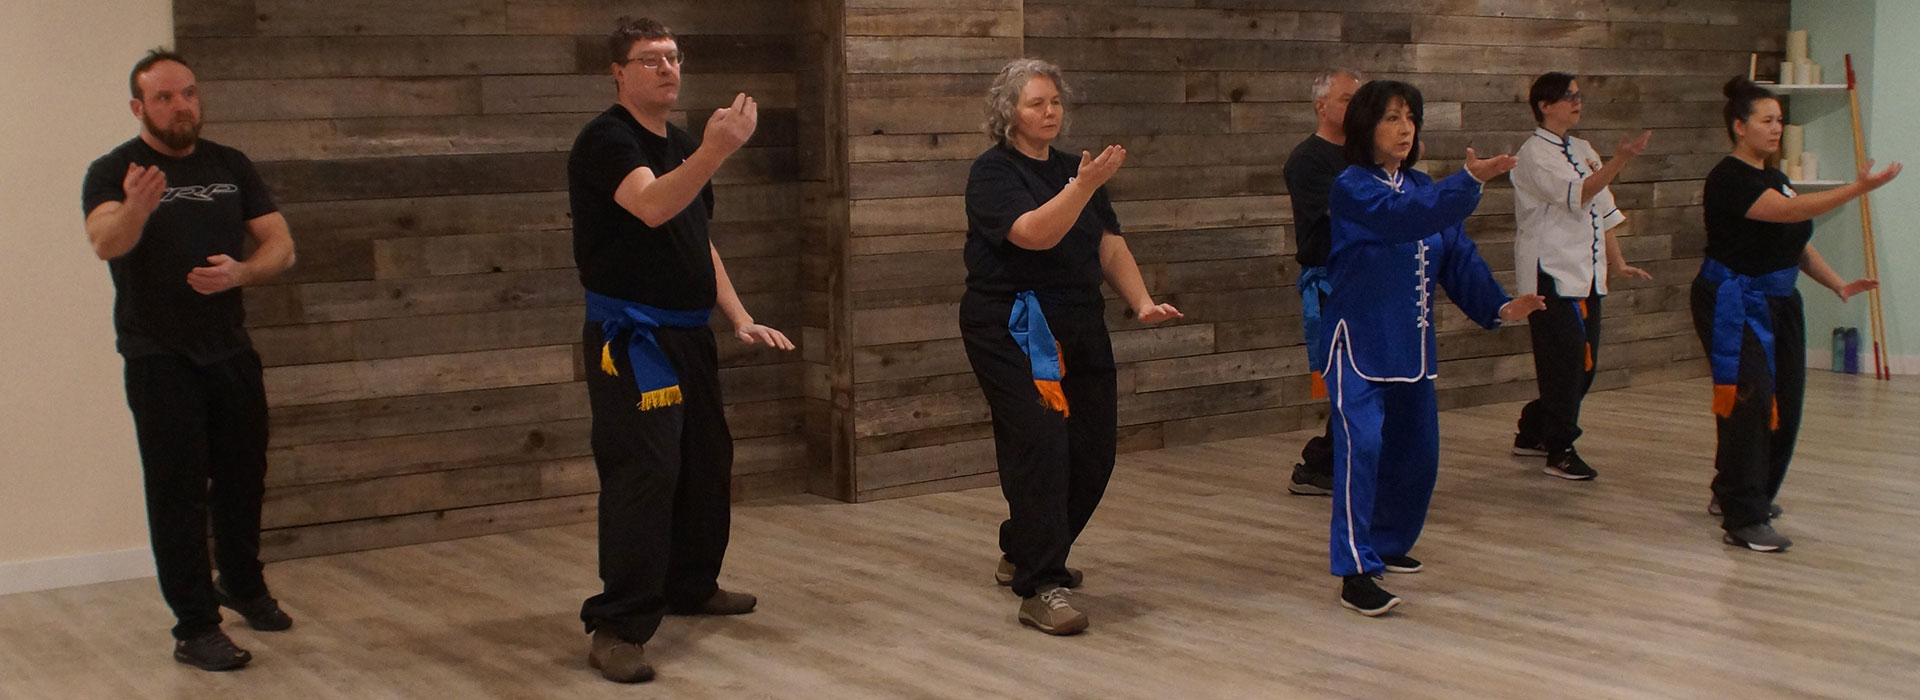 From beginner to intermediate and beyond, Tai Chi classes at Plum Blossom Tai Chi in Airdrie, Alberta, Canada, are a great way to improve your health and well-being.